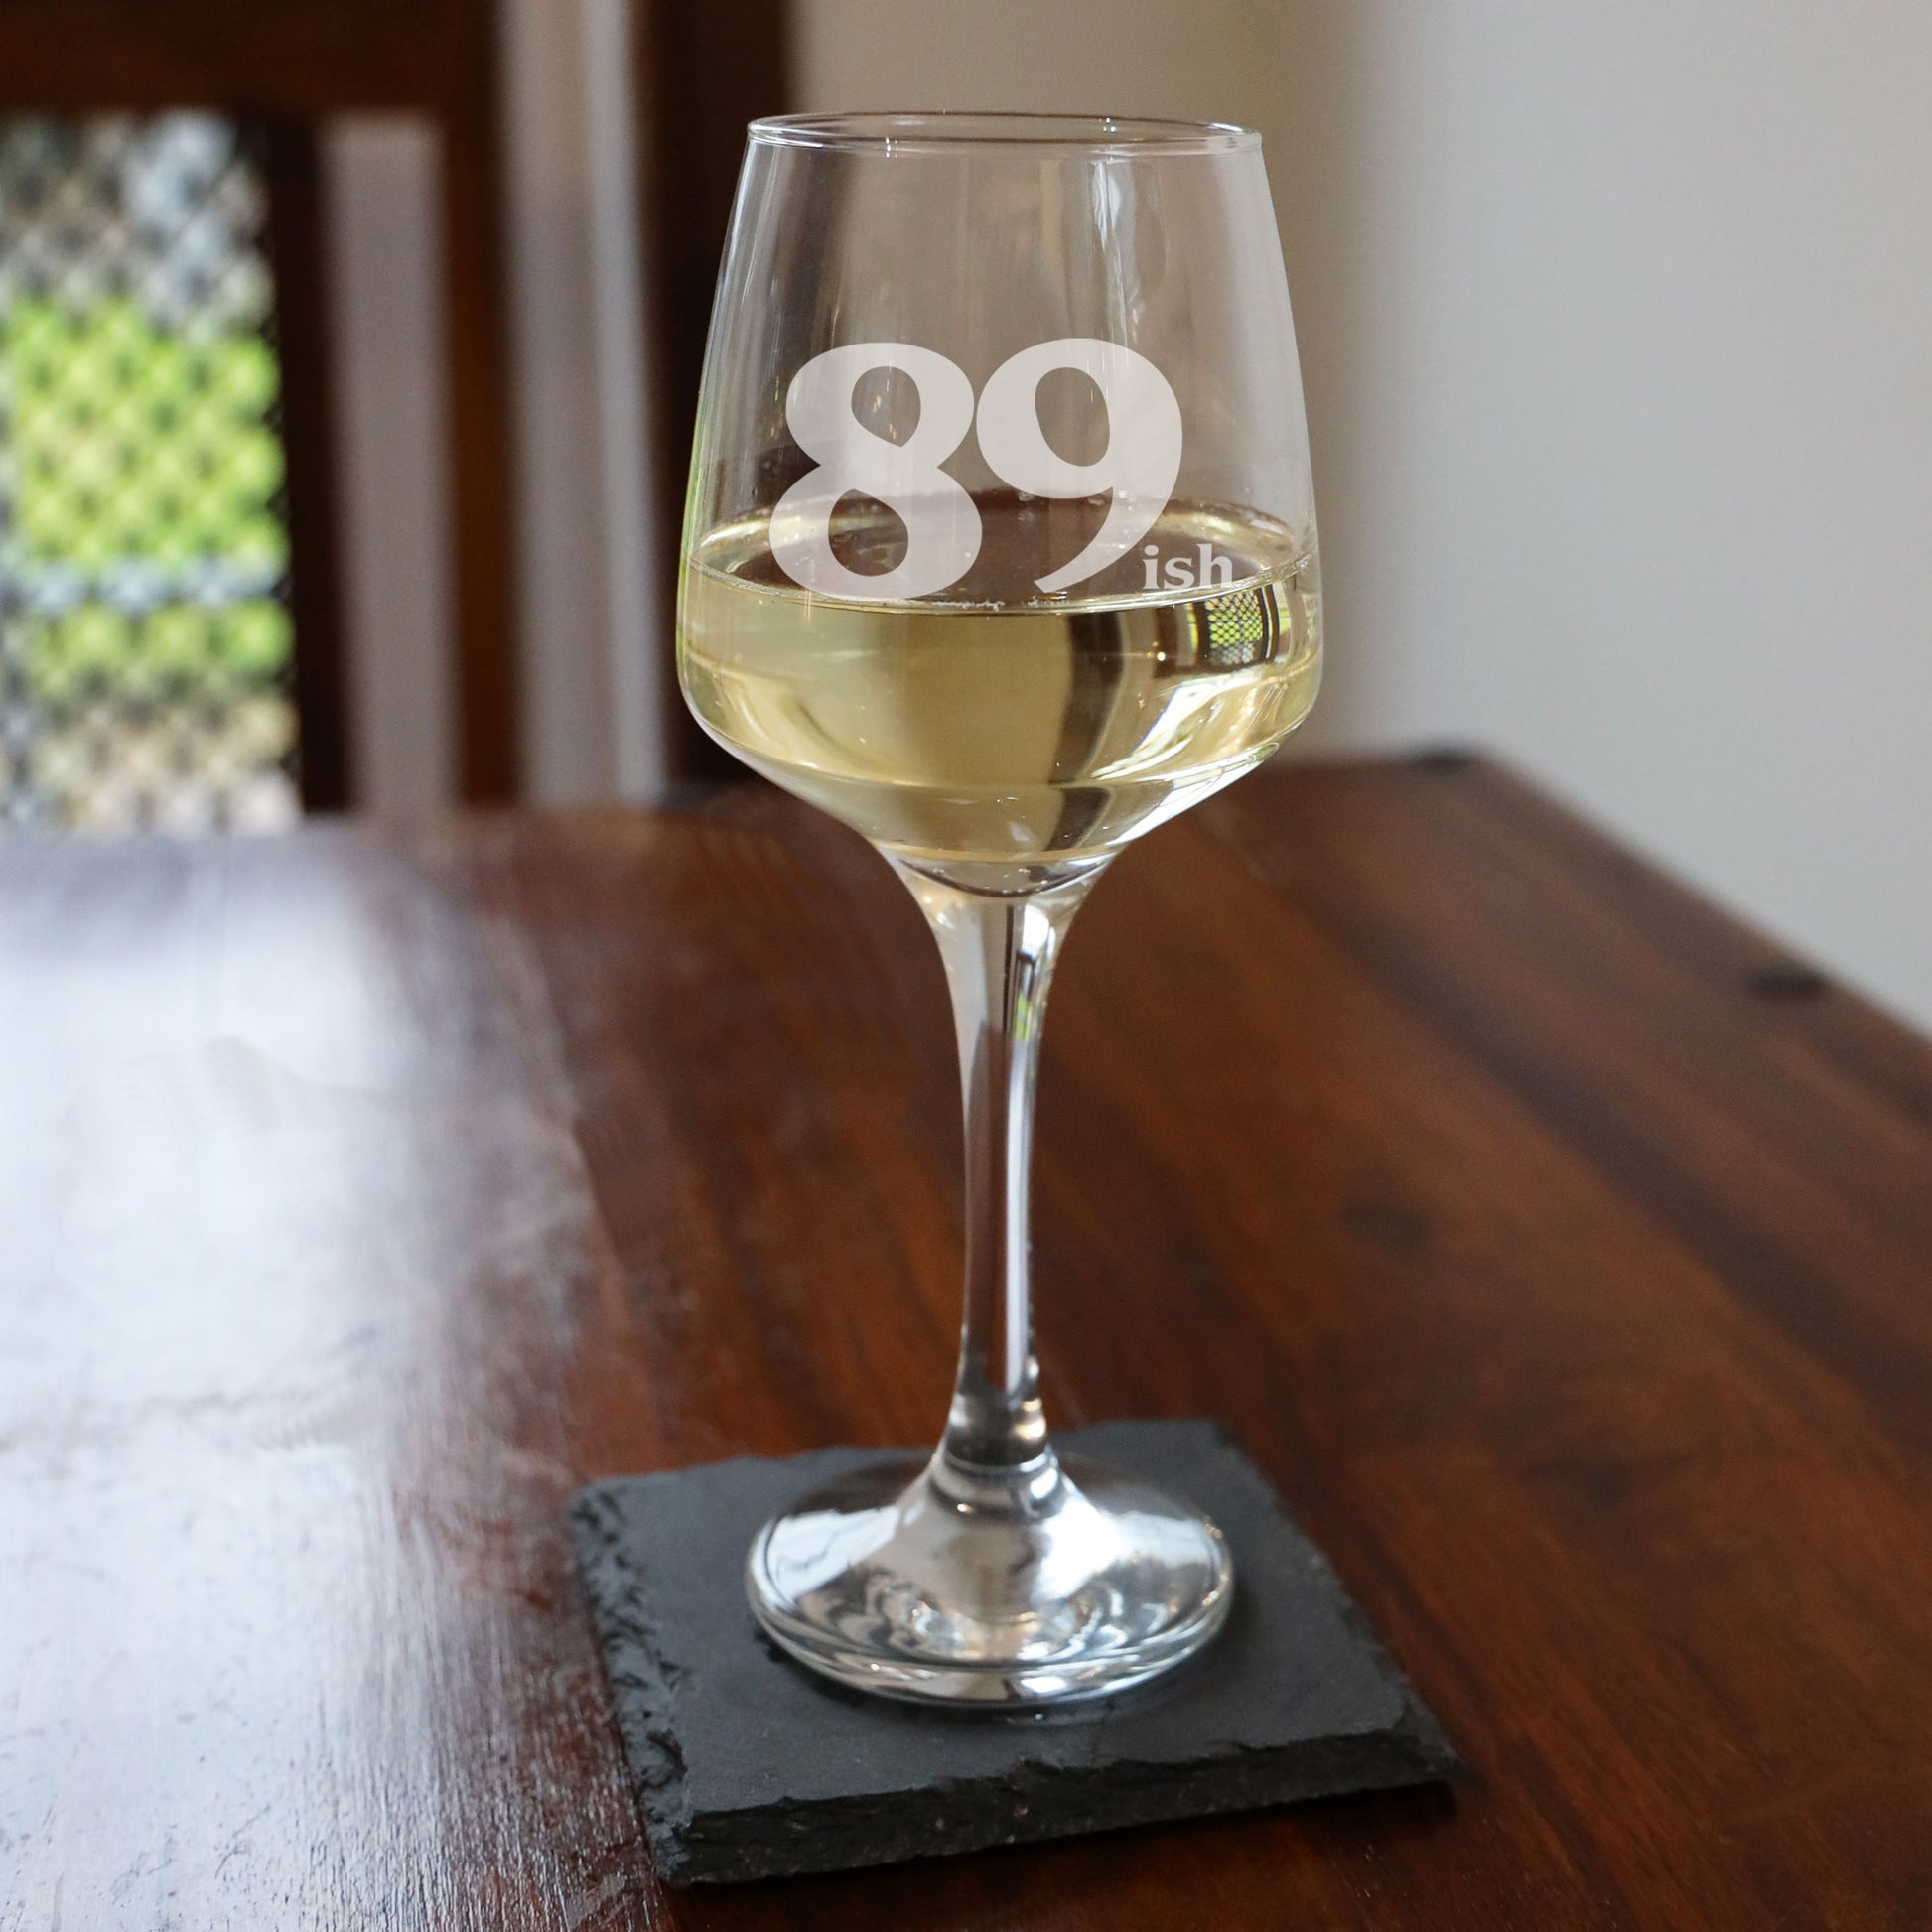 89ish Wine Glass and/or Coaster Set  - Always Looking Good -   